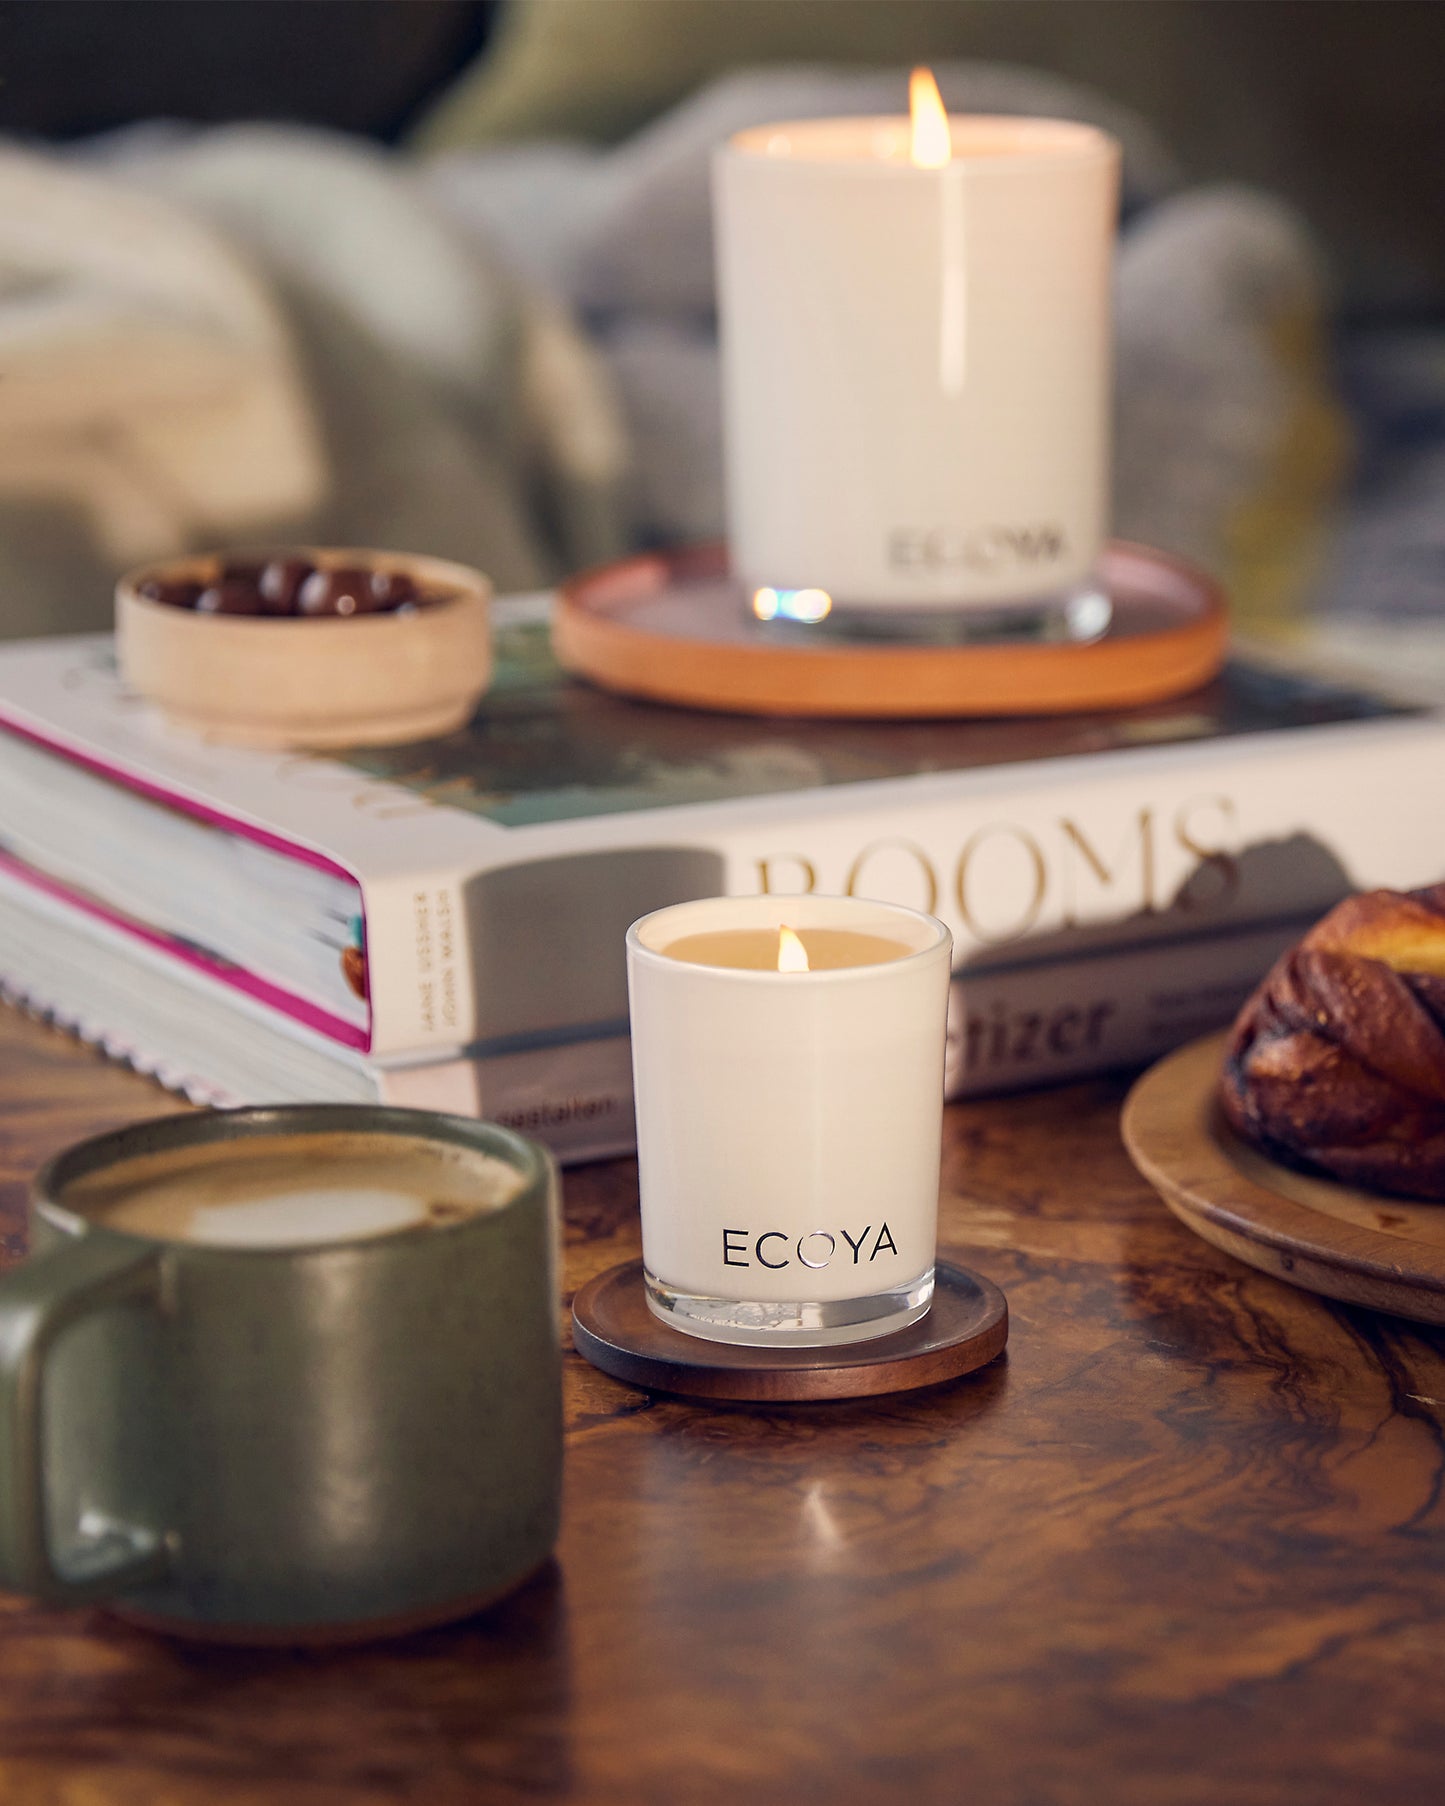 The Great Indoors Collection: Eucalyptus & Patchouli Mini Madison Candle